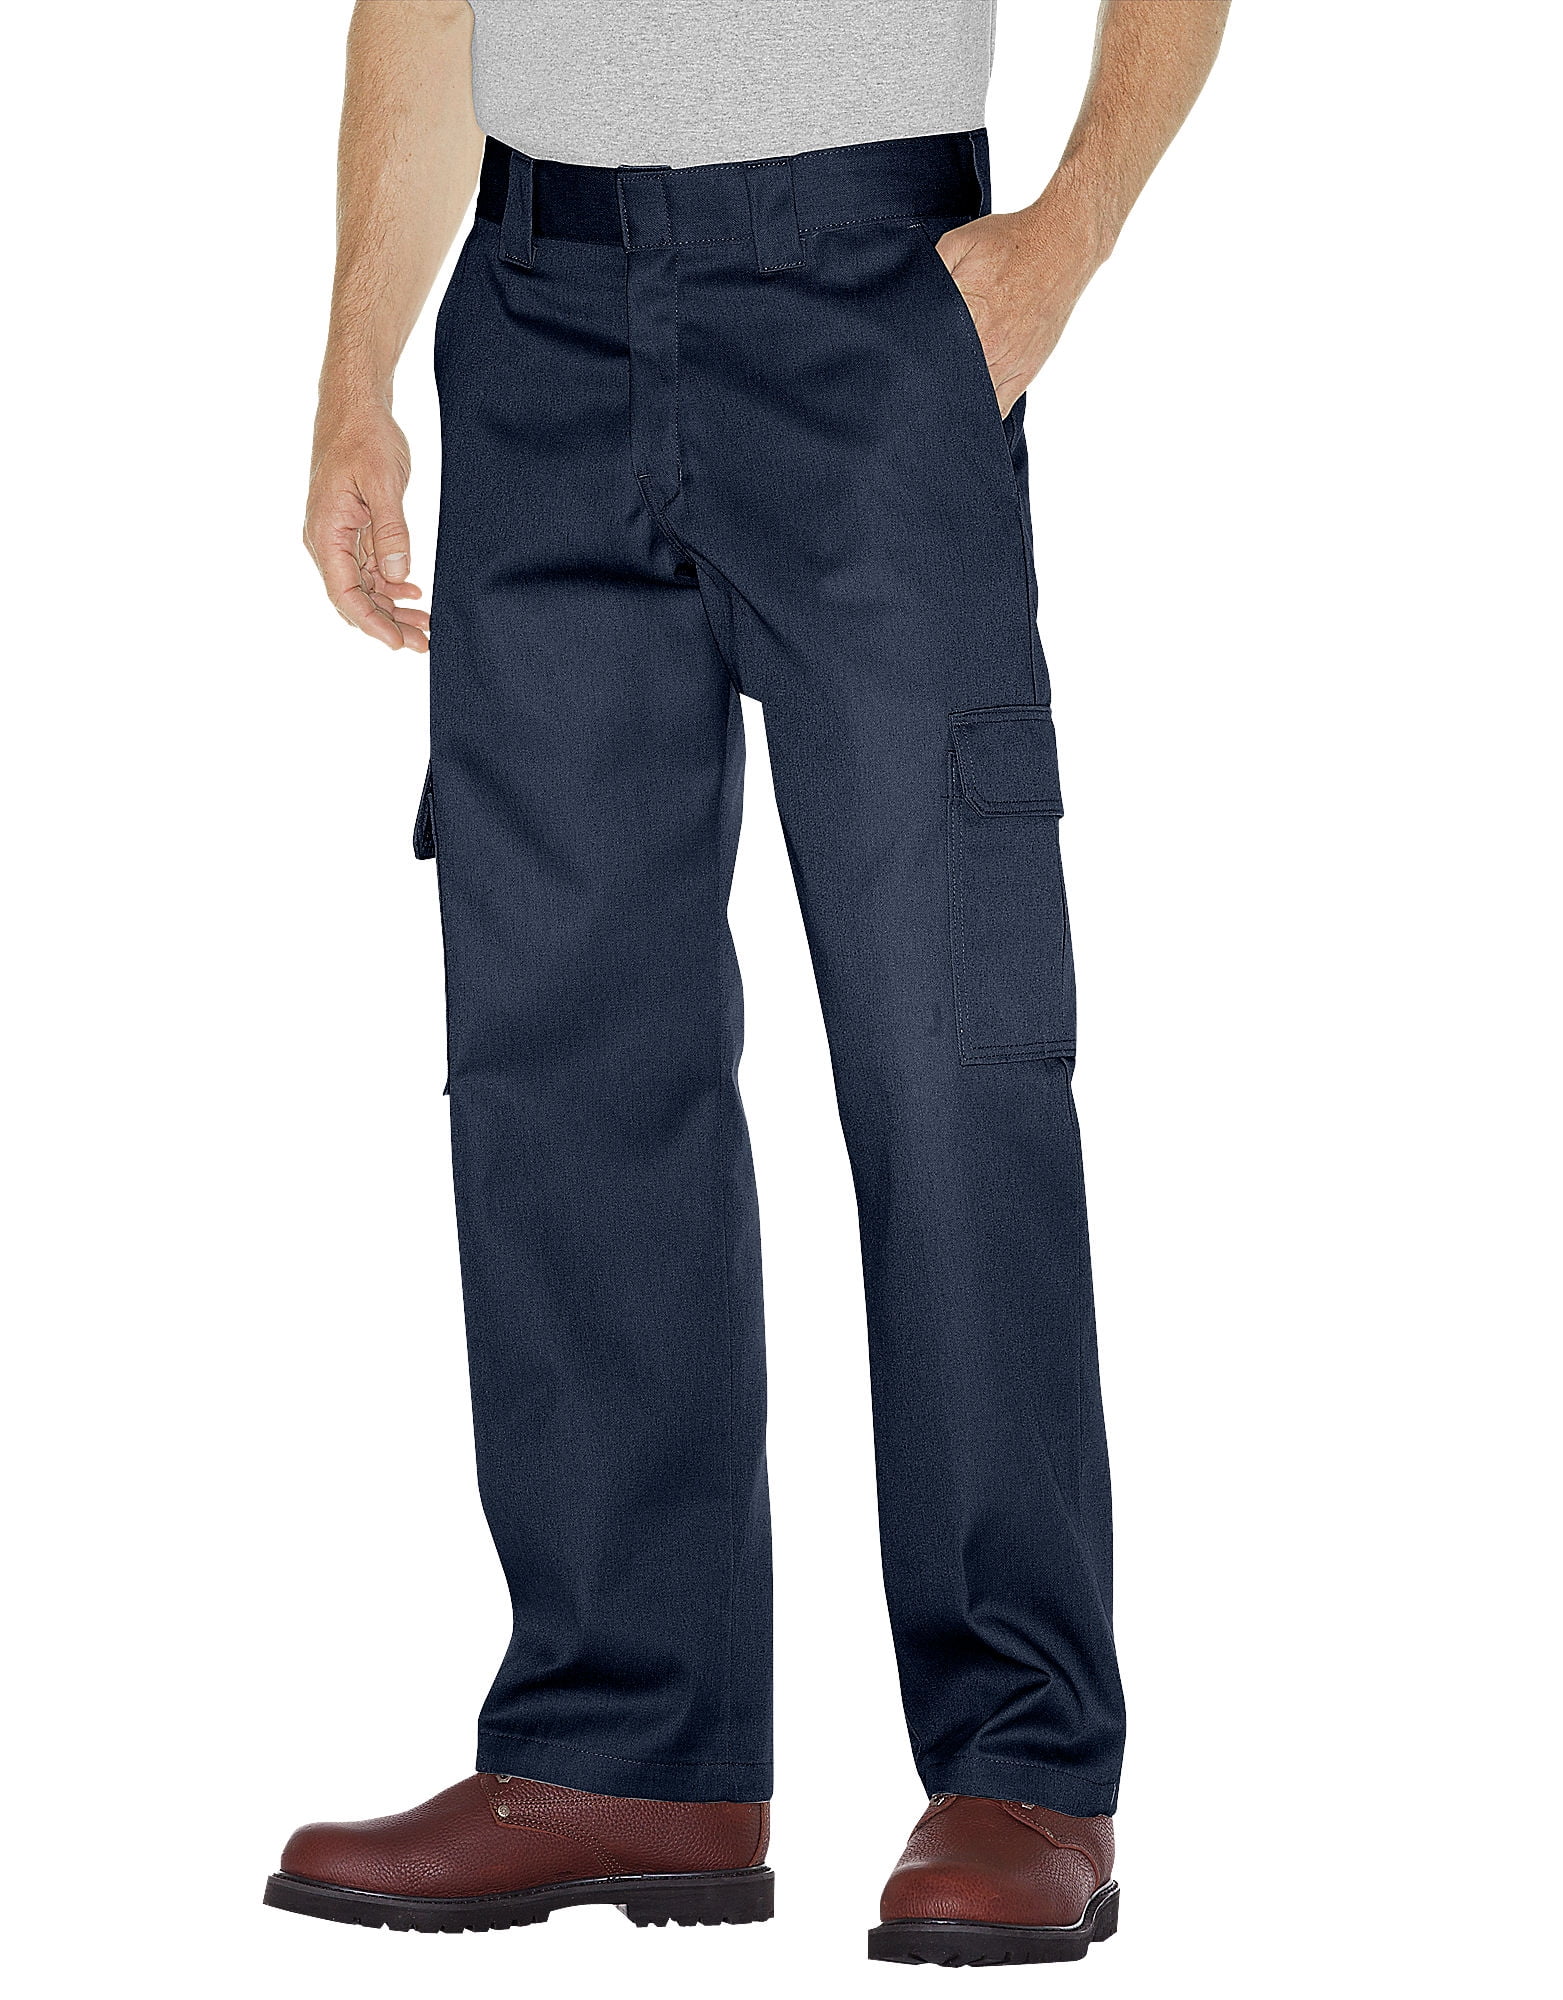 Dickies Cargo Pants With Cell Phone Pocket Top Sellers, 54% OFF 